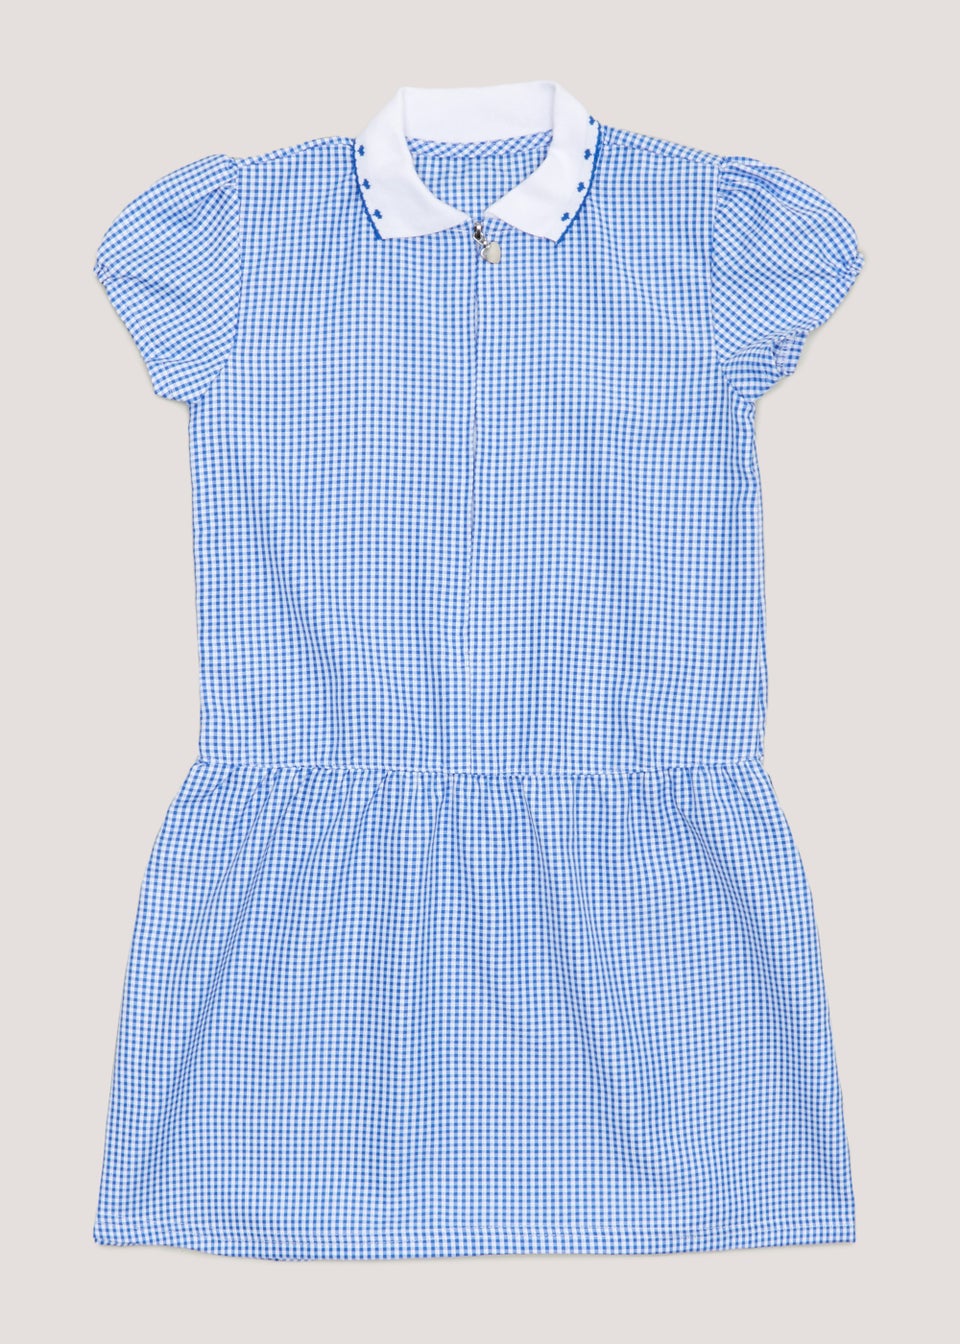 Girls Blue Generous Fit Knitted Collar Gingham School Dress (3-14yrs)